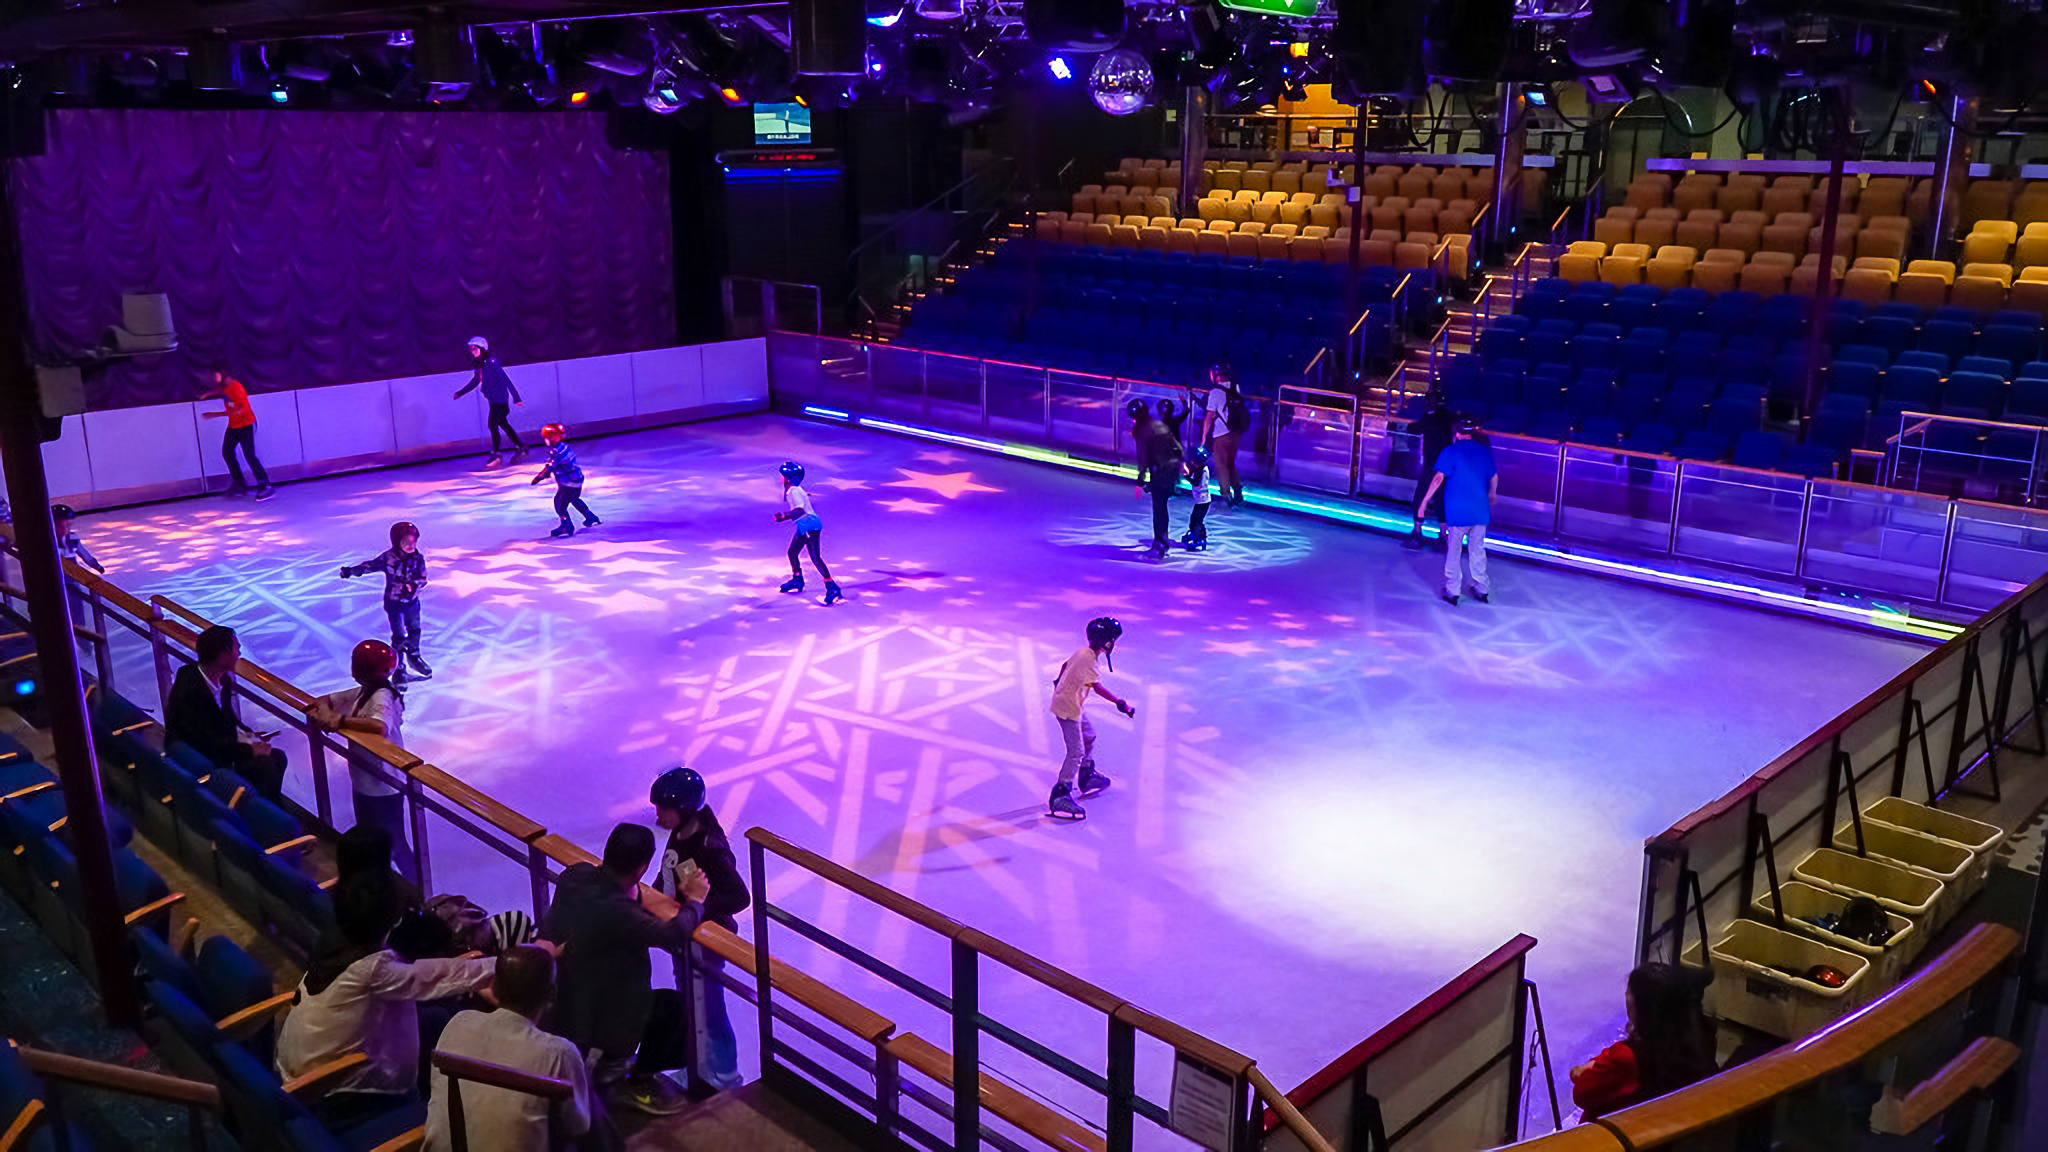 Open Skating on Royal Caribbean's Voyager of the Seas